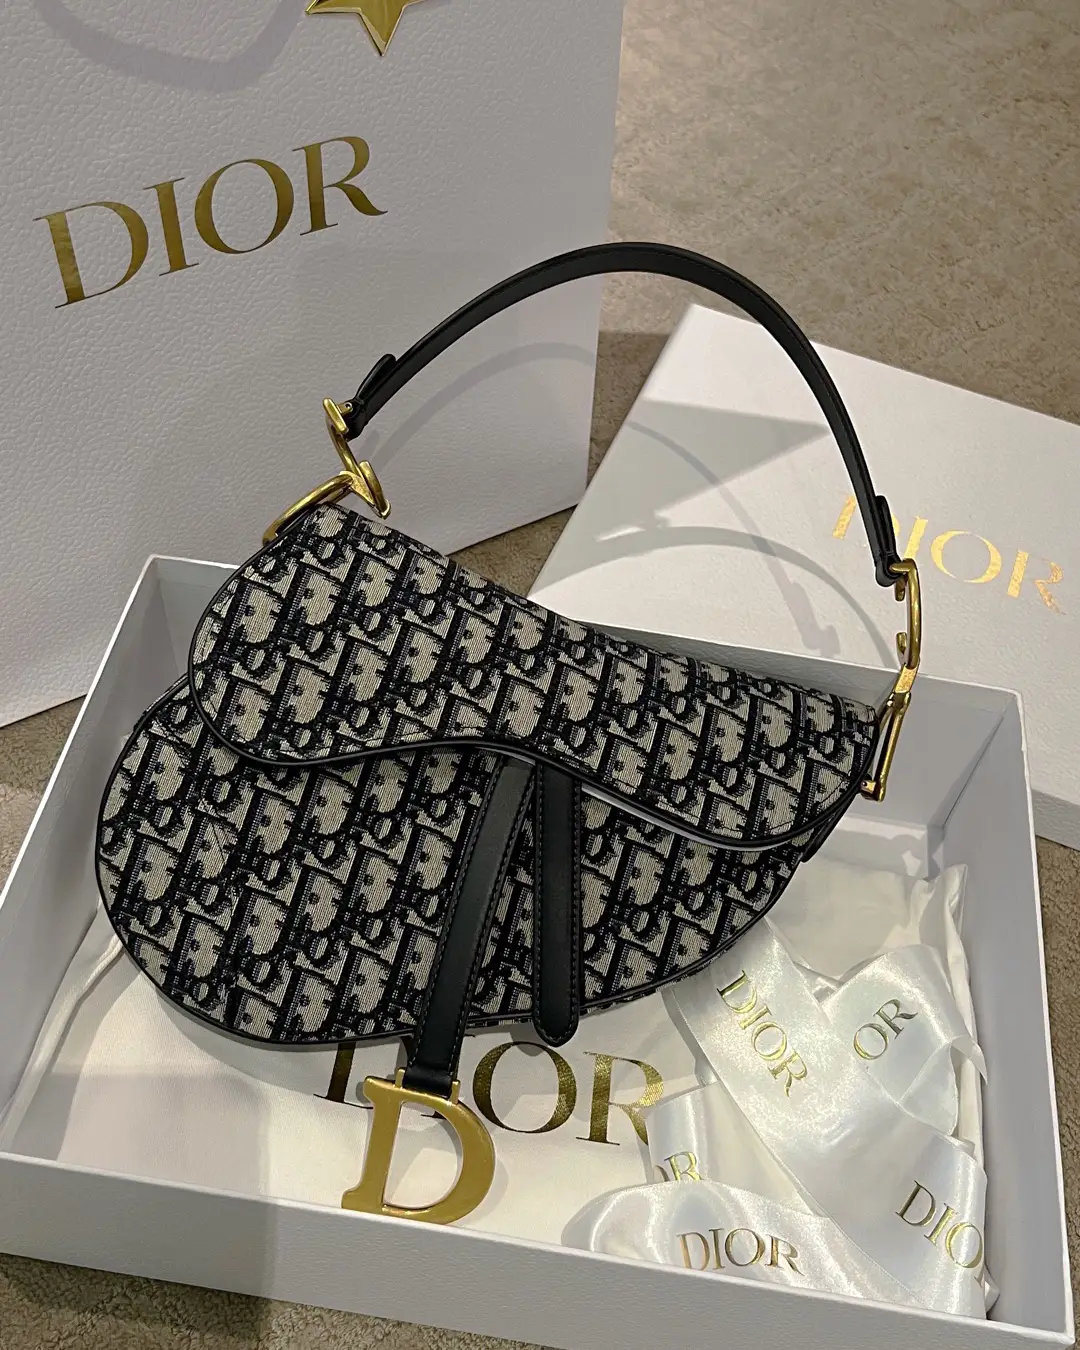 BACK IN THE SADDLE: THE HISTORY OF DIOR'S ICONIC BAG